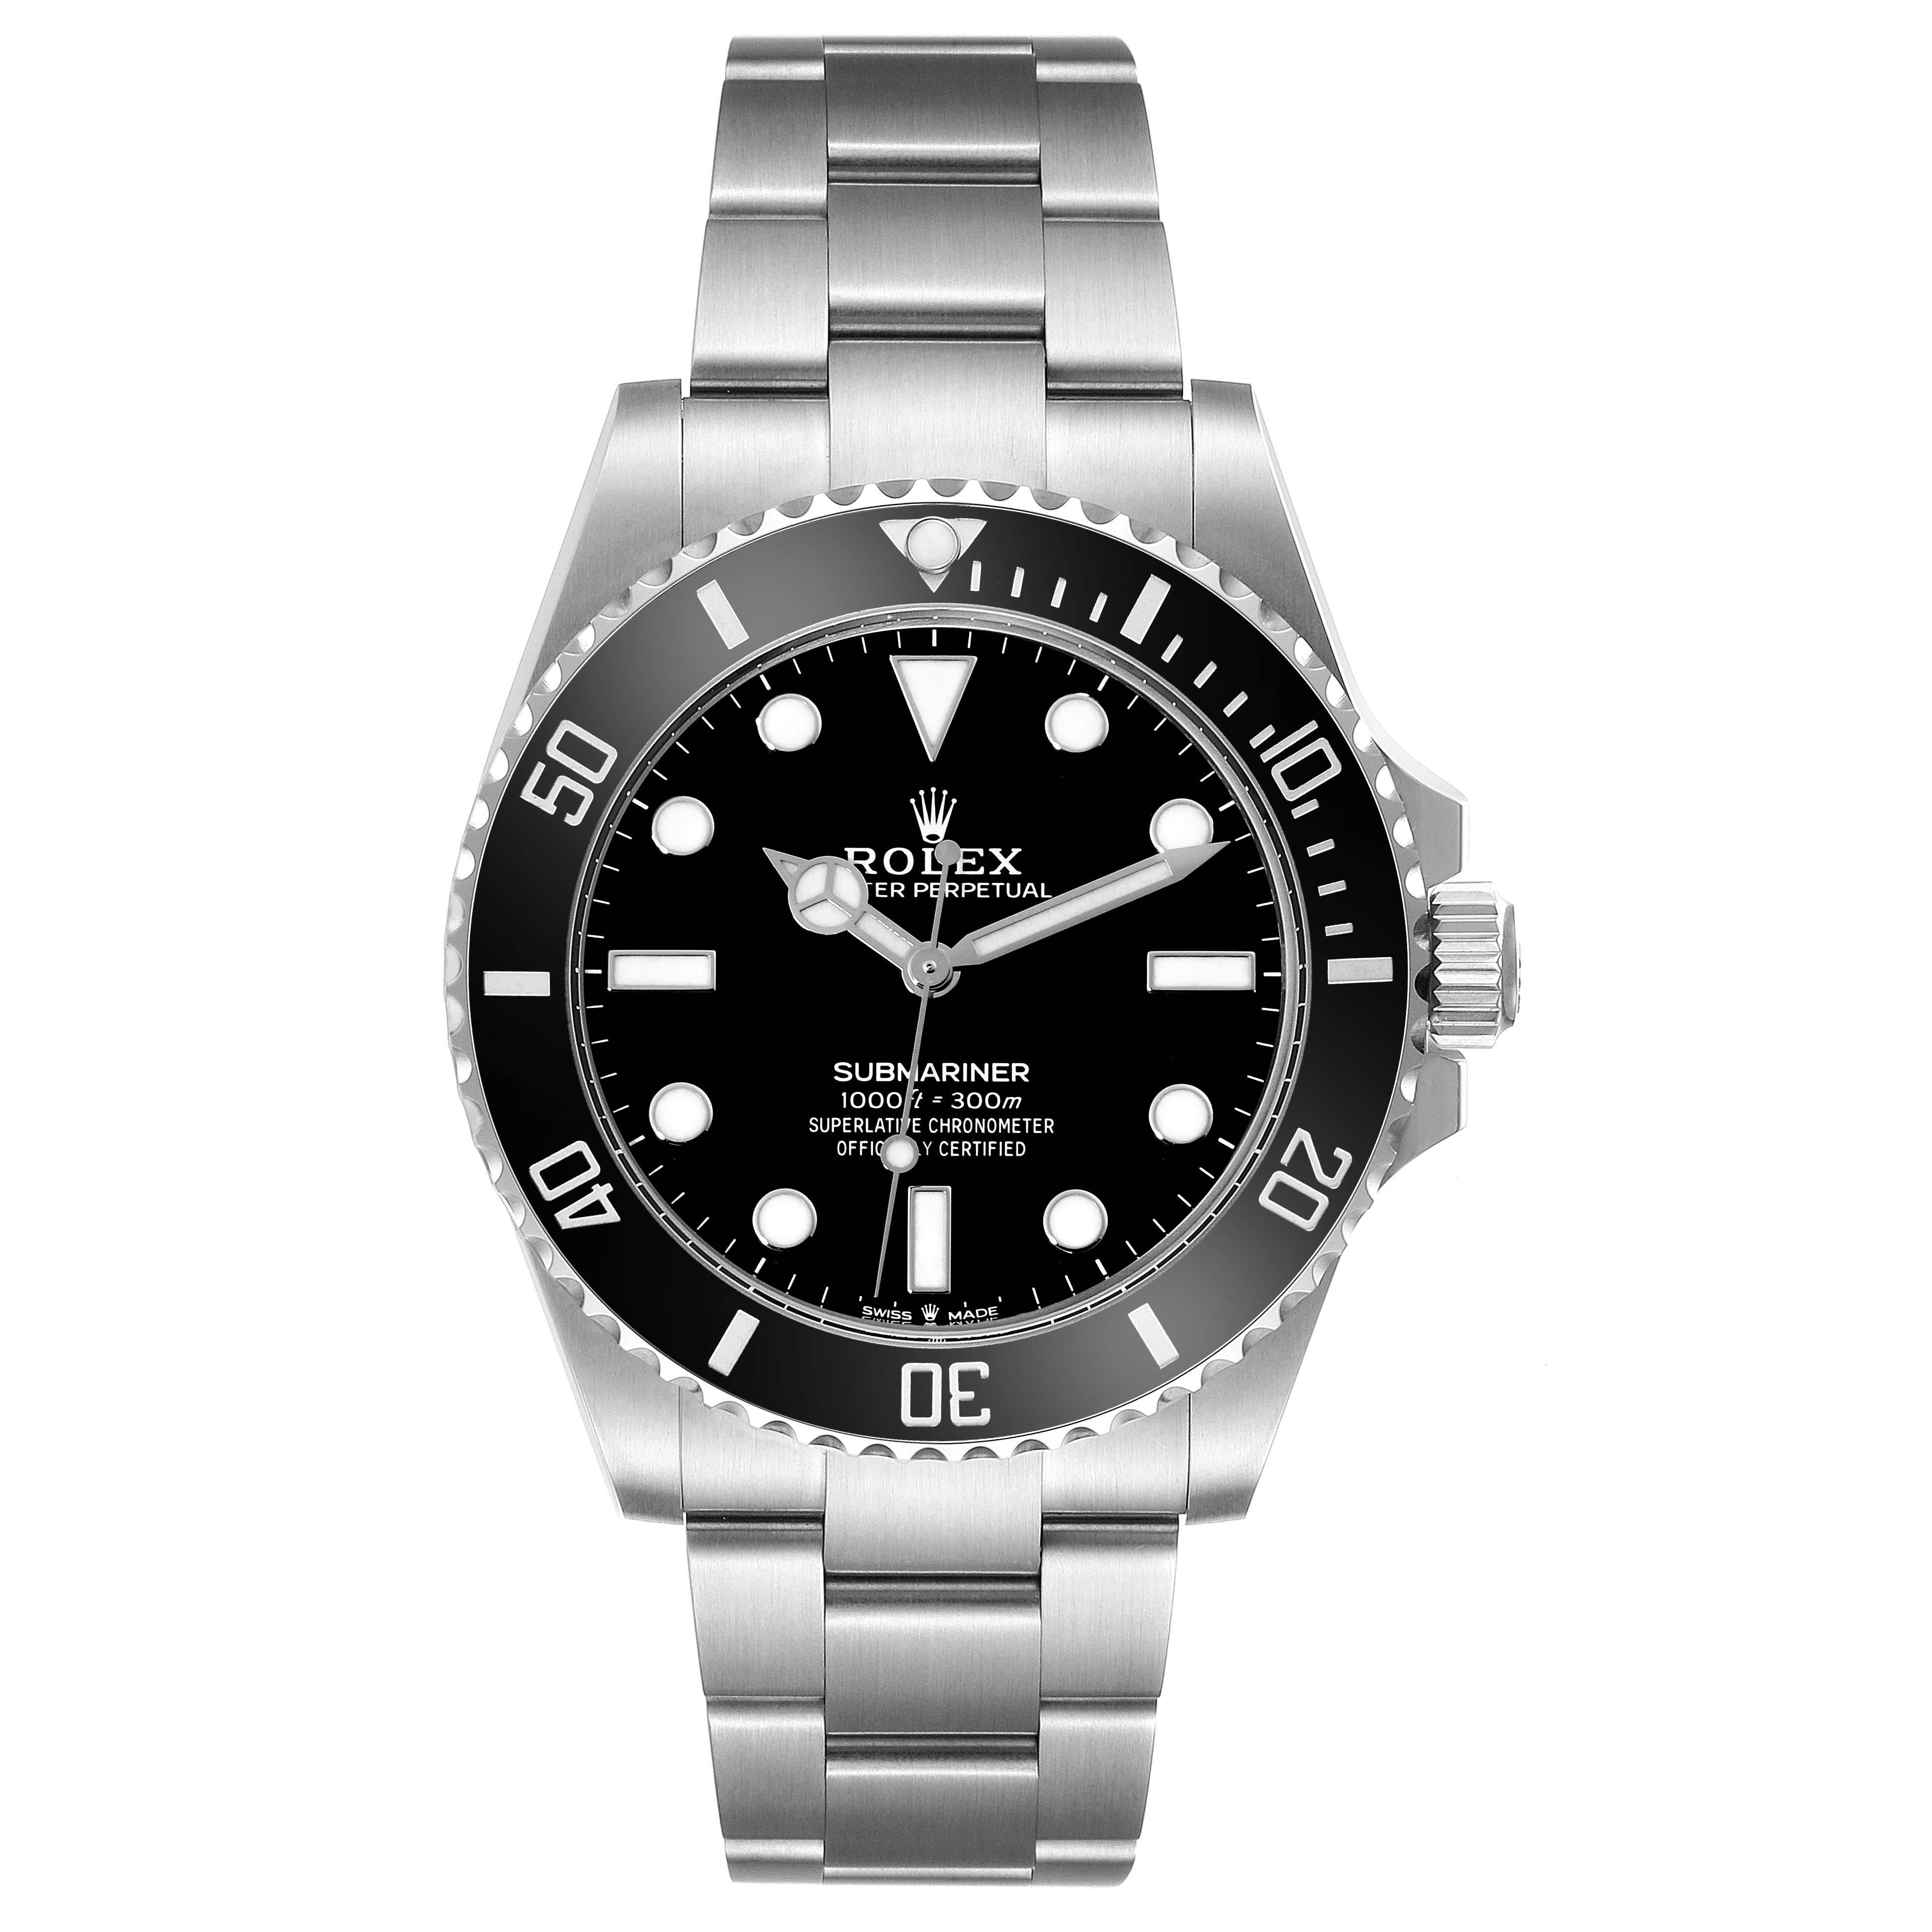 Rolex Submariner Non-Date 4 Liner Ceramic Bezel Steel Mens Watch 124060 Box Card. Officially certified chronometer automatic self-winding movement. Stainless steel case 41.0 mm in diameter. Rolex logo on the crown. Special time-lapse unidirectional